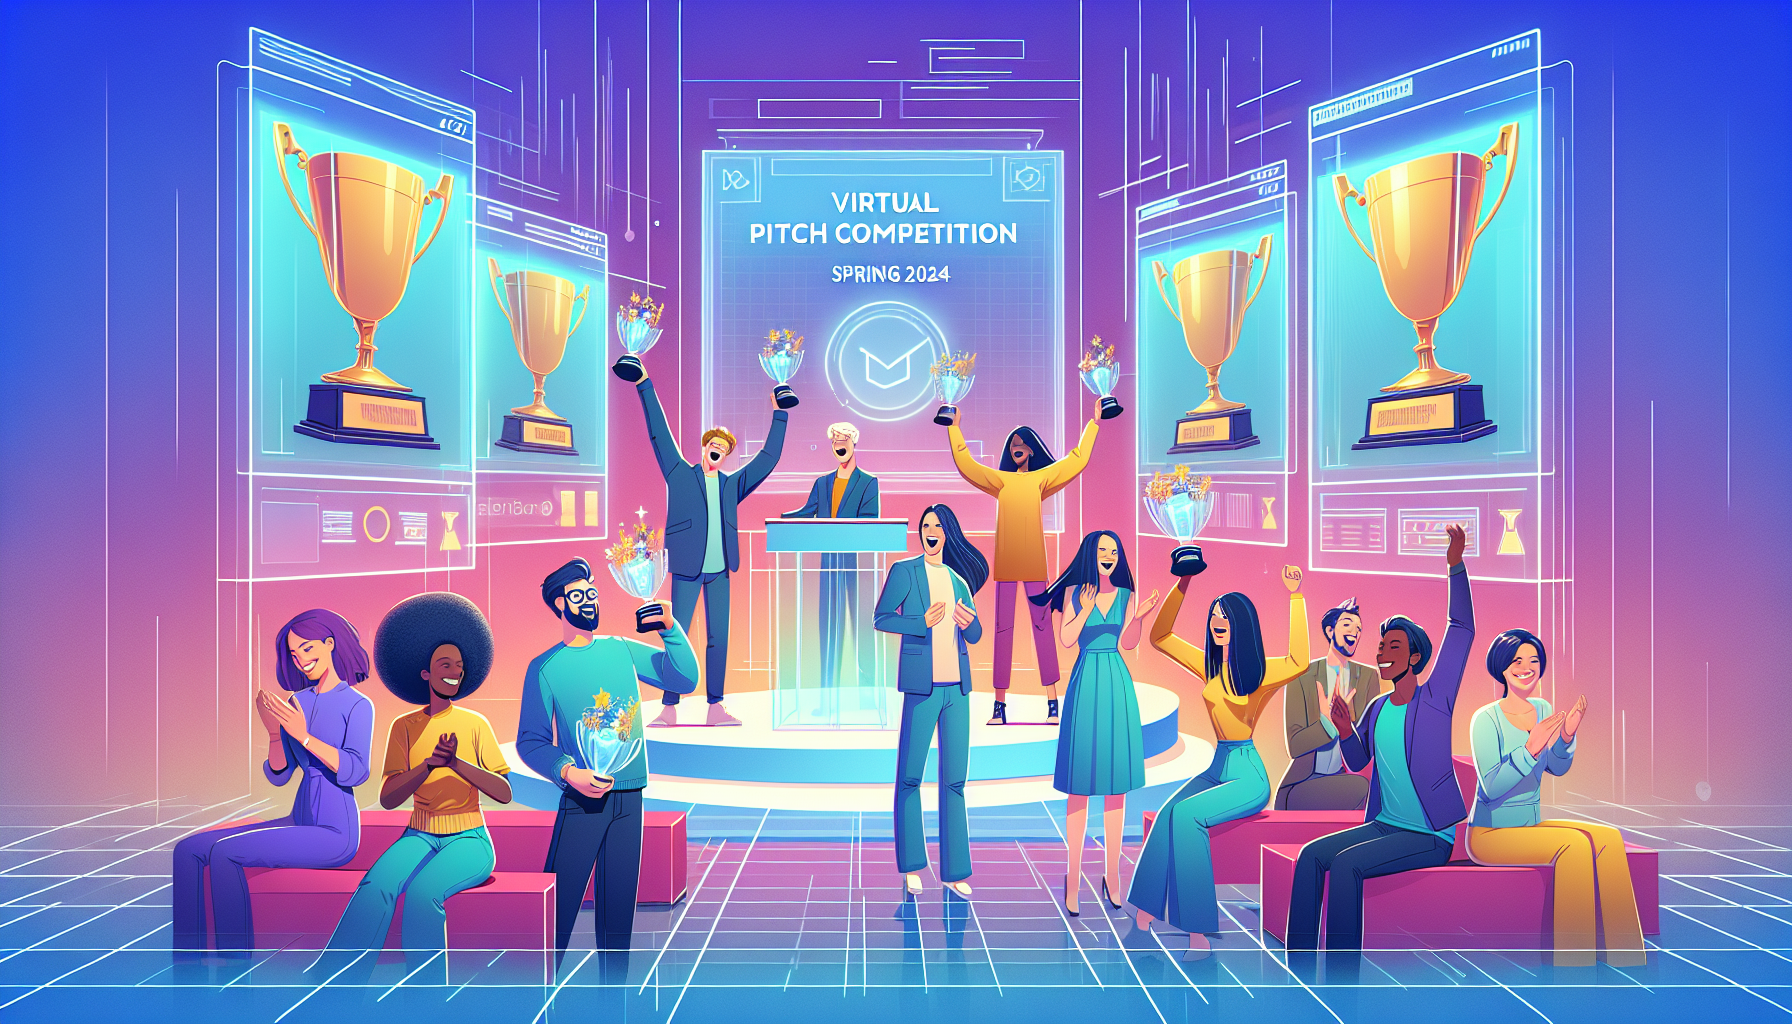 Digital award ceremony of the Spring 2024 ScreenCraft Virtual Pitch Competition, with diverse group of filmmakers celebrating while holding virtual trophies on a futuristic, holographic stage.